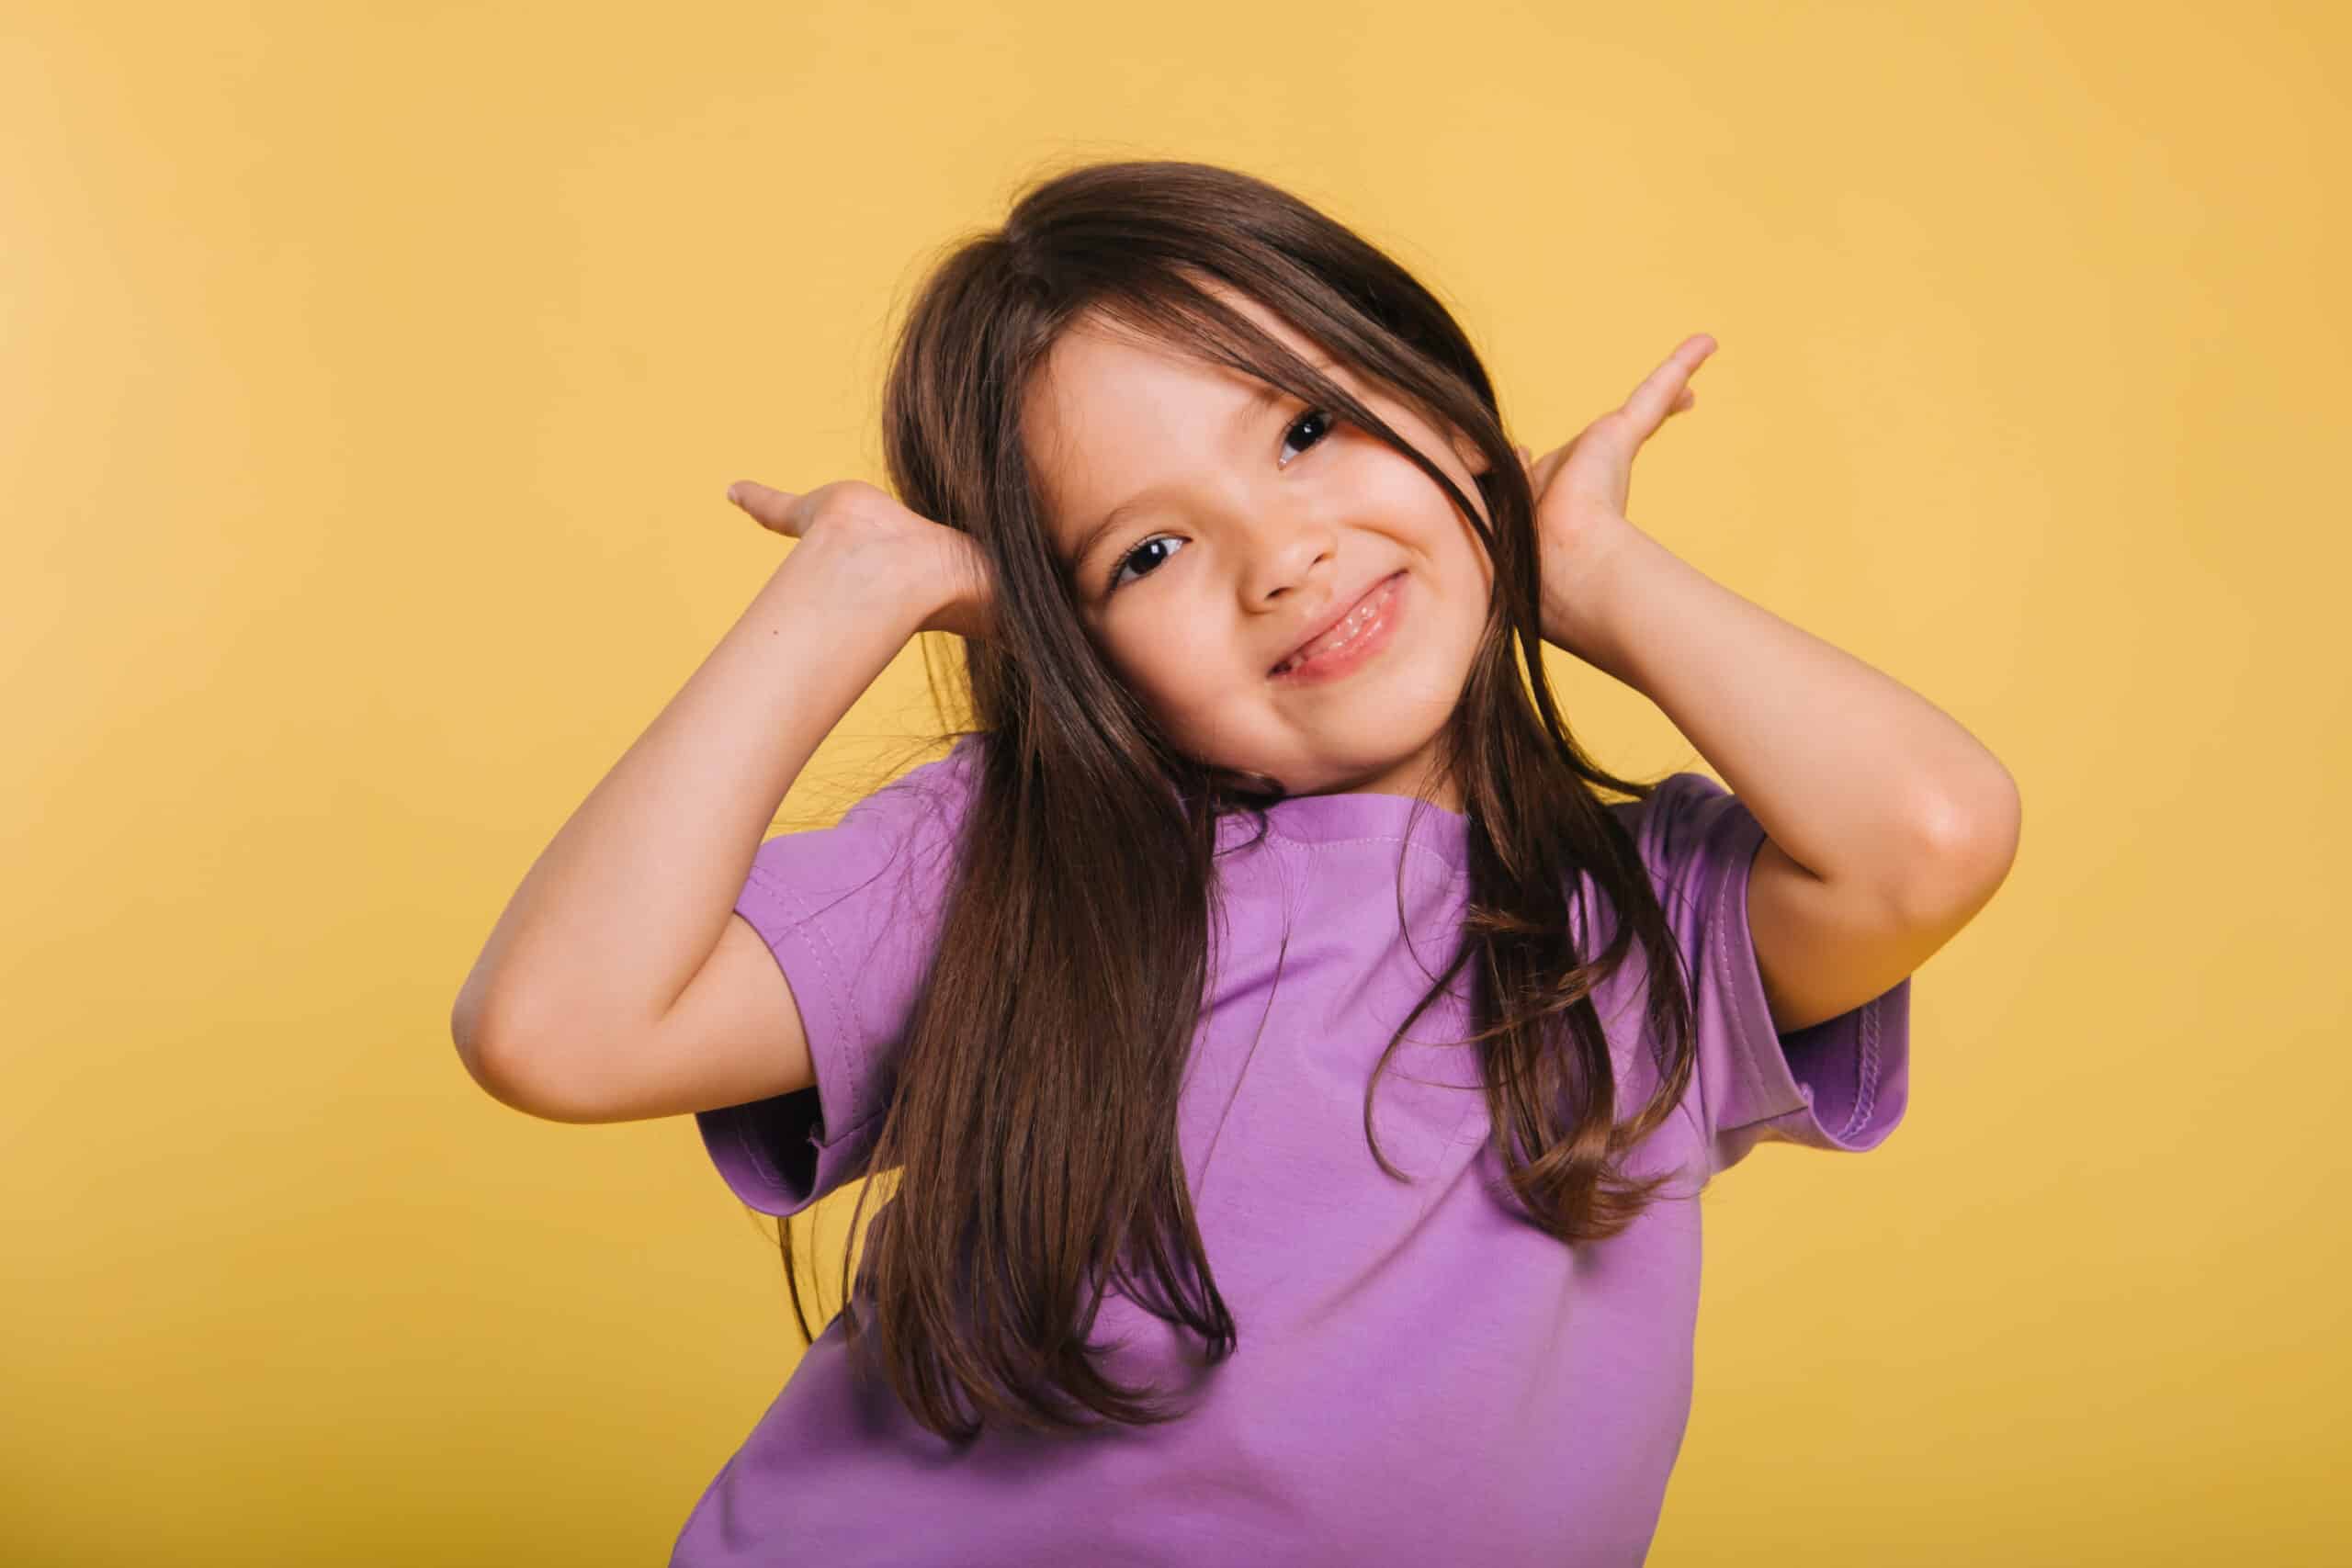 beautiful little girl in a purple t-shirt posing on a yellow background. Cute baby makes faces. Photo in studio